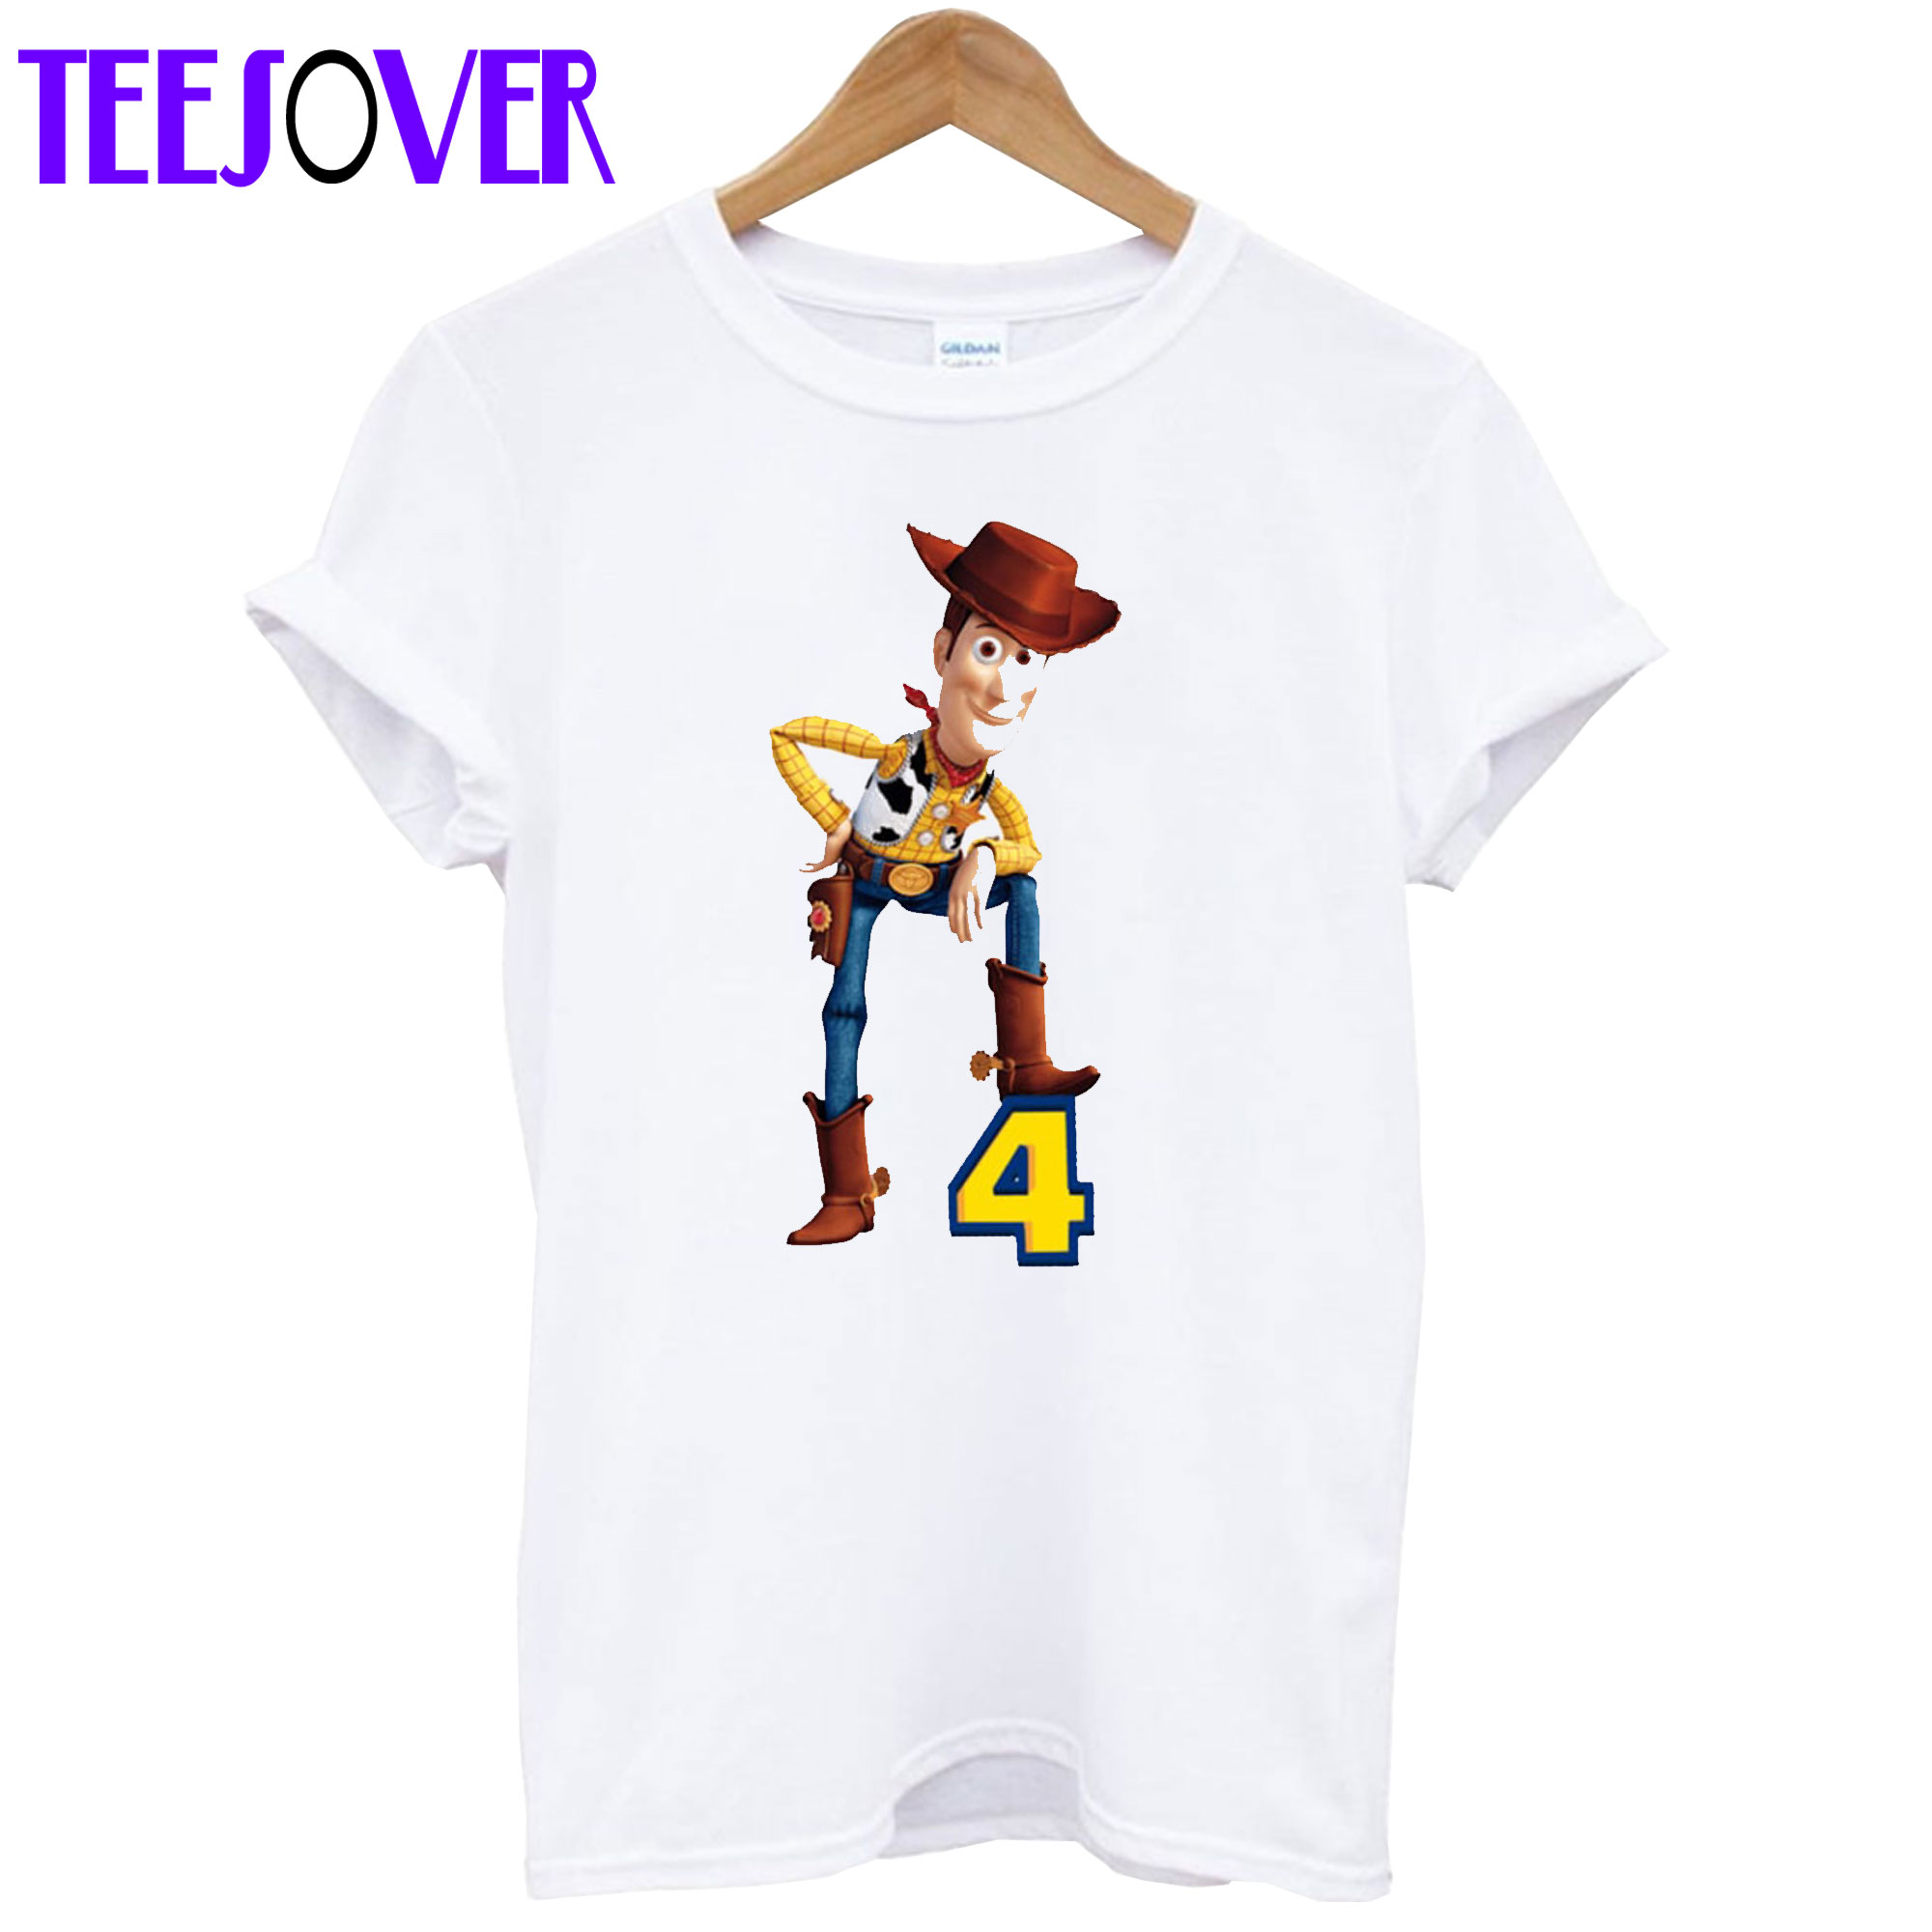 Toy Story 4 T-Shirt